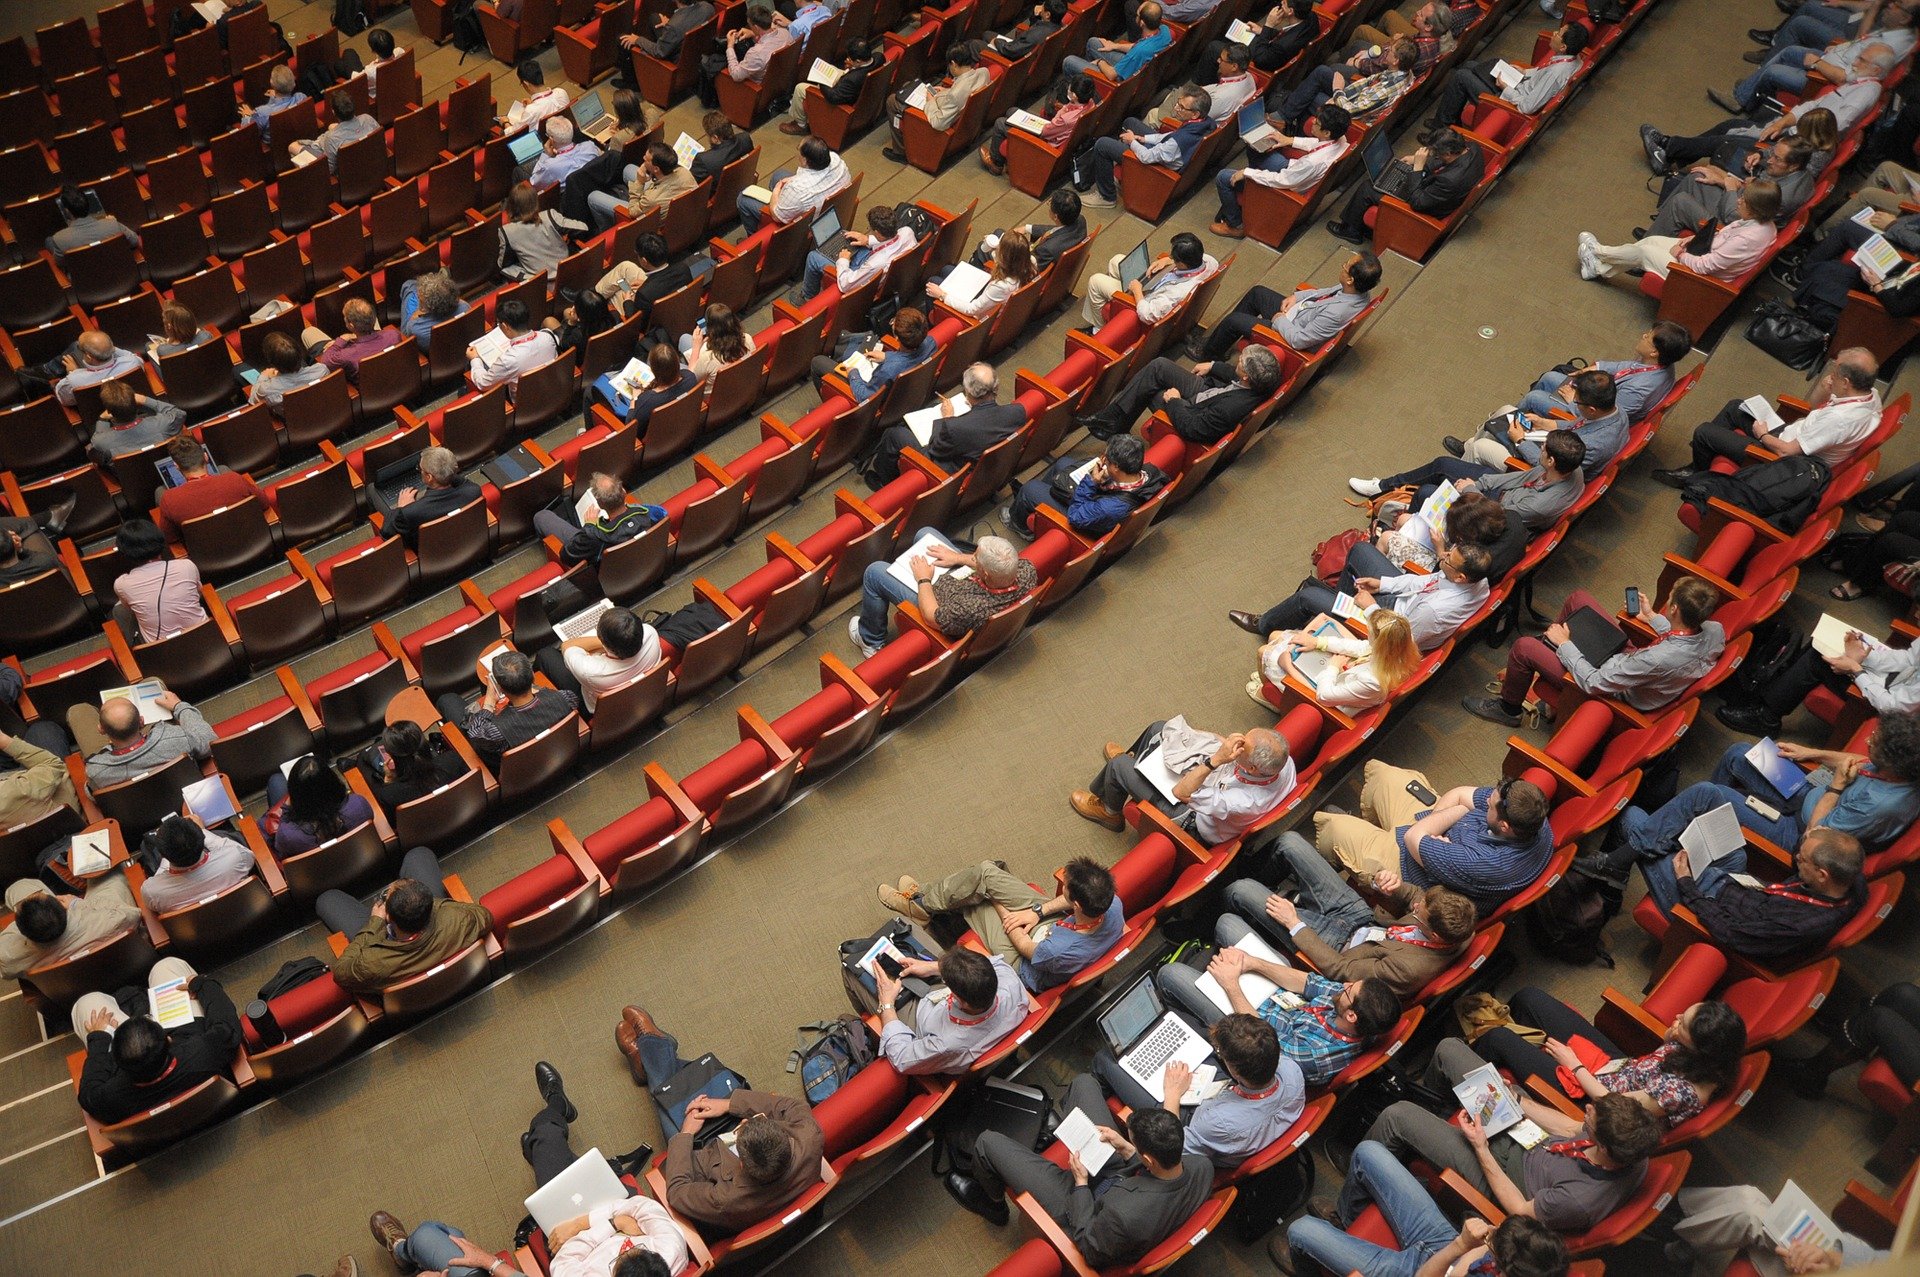 Simitless helps academics and businesses organize their conferences.